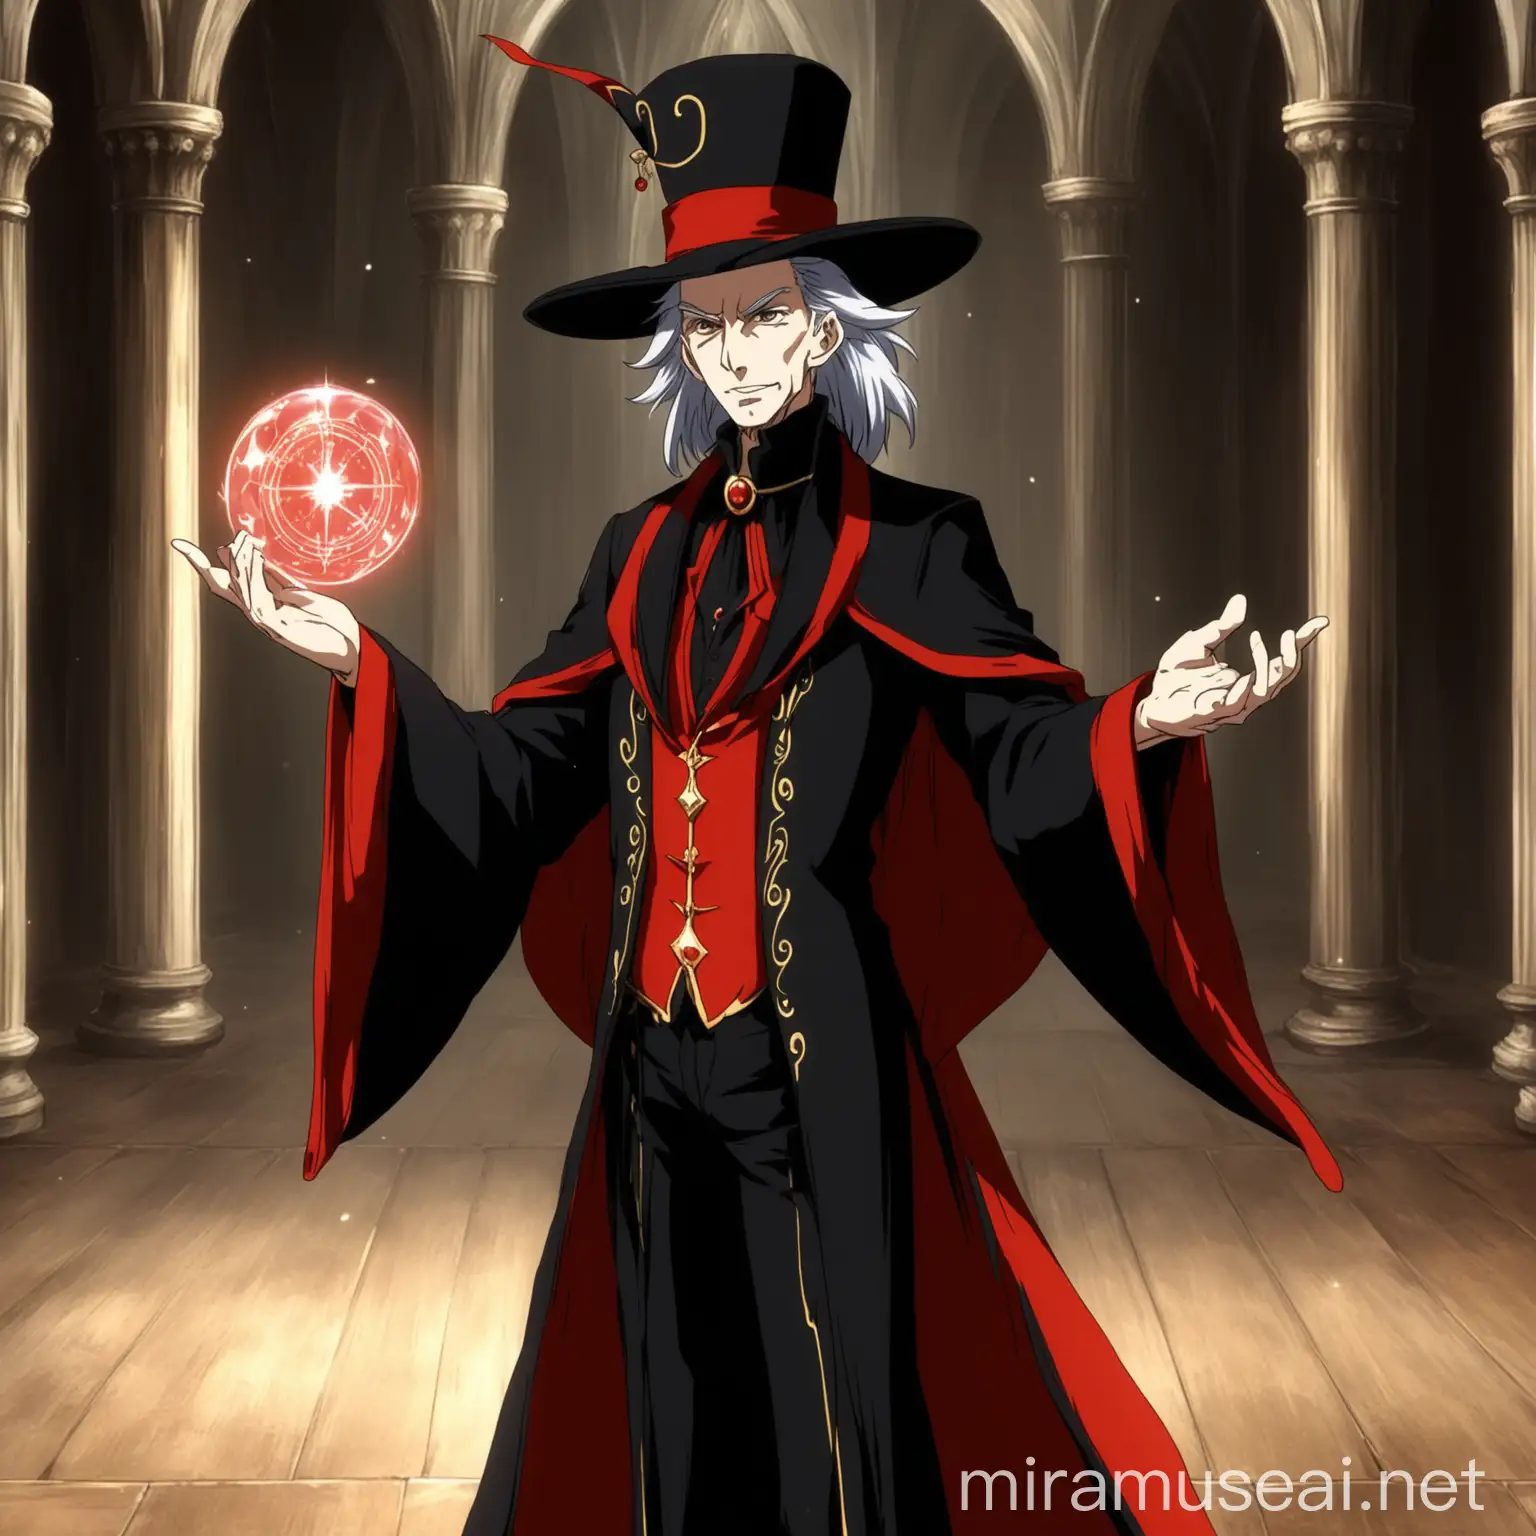 a old court magician fantasy, he wears a black and red. in anime